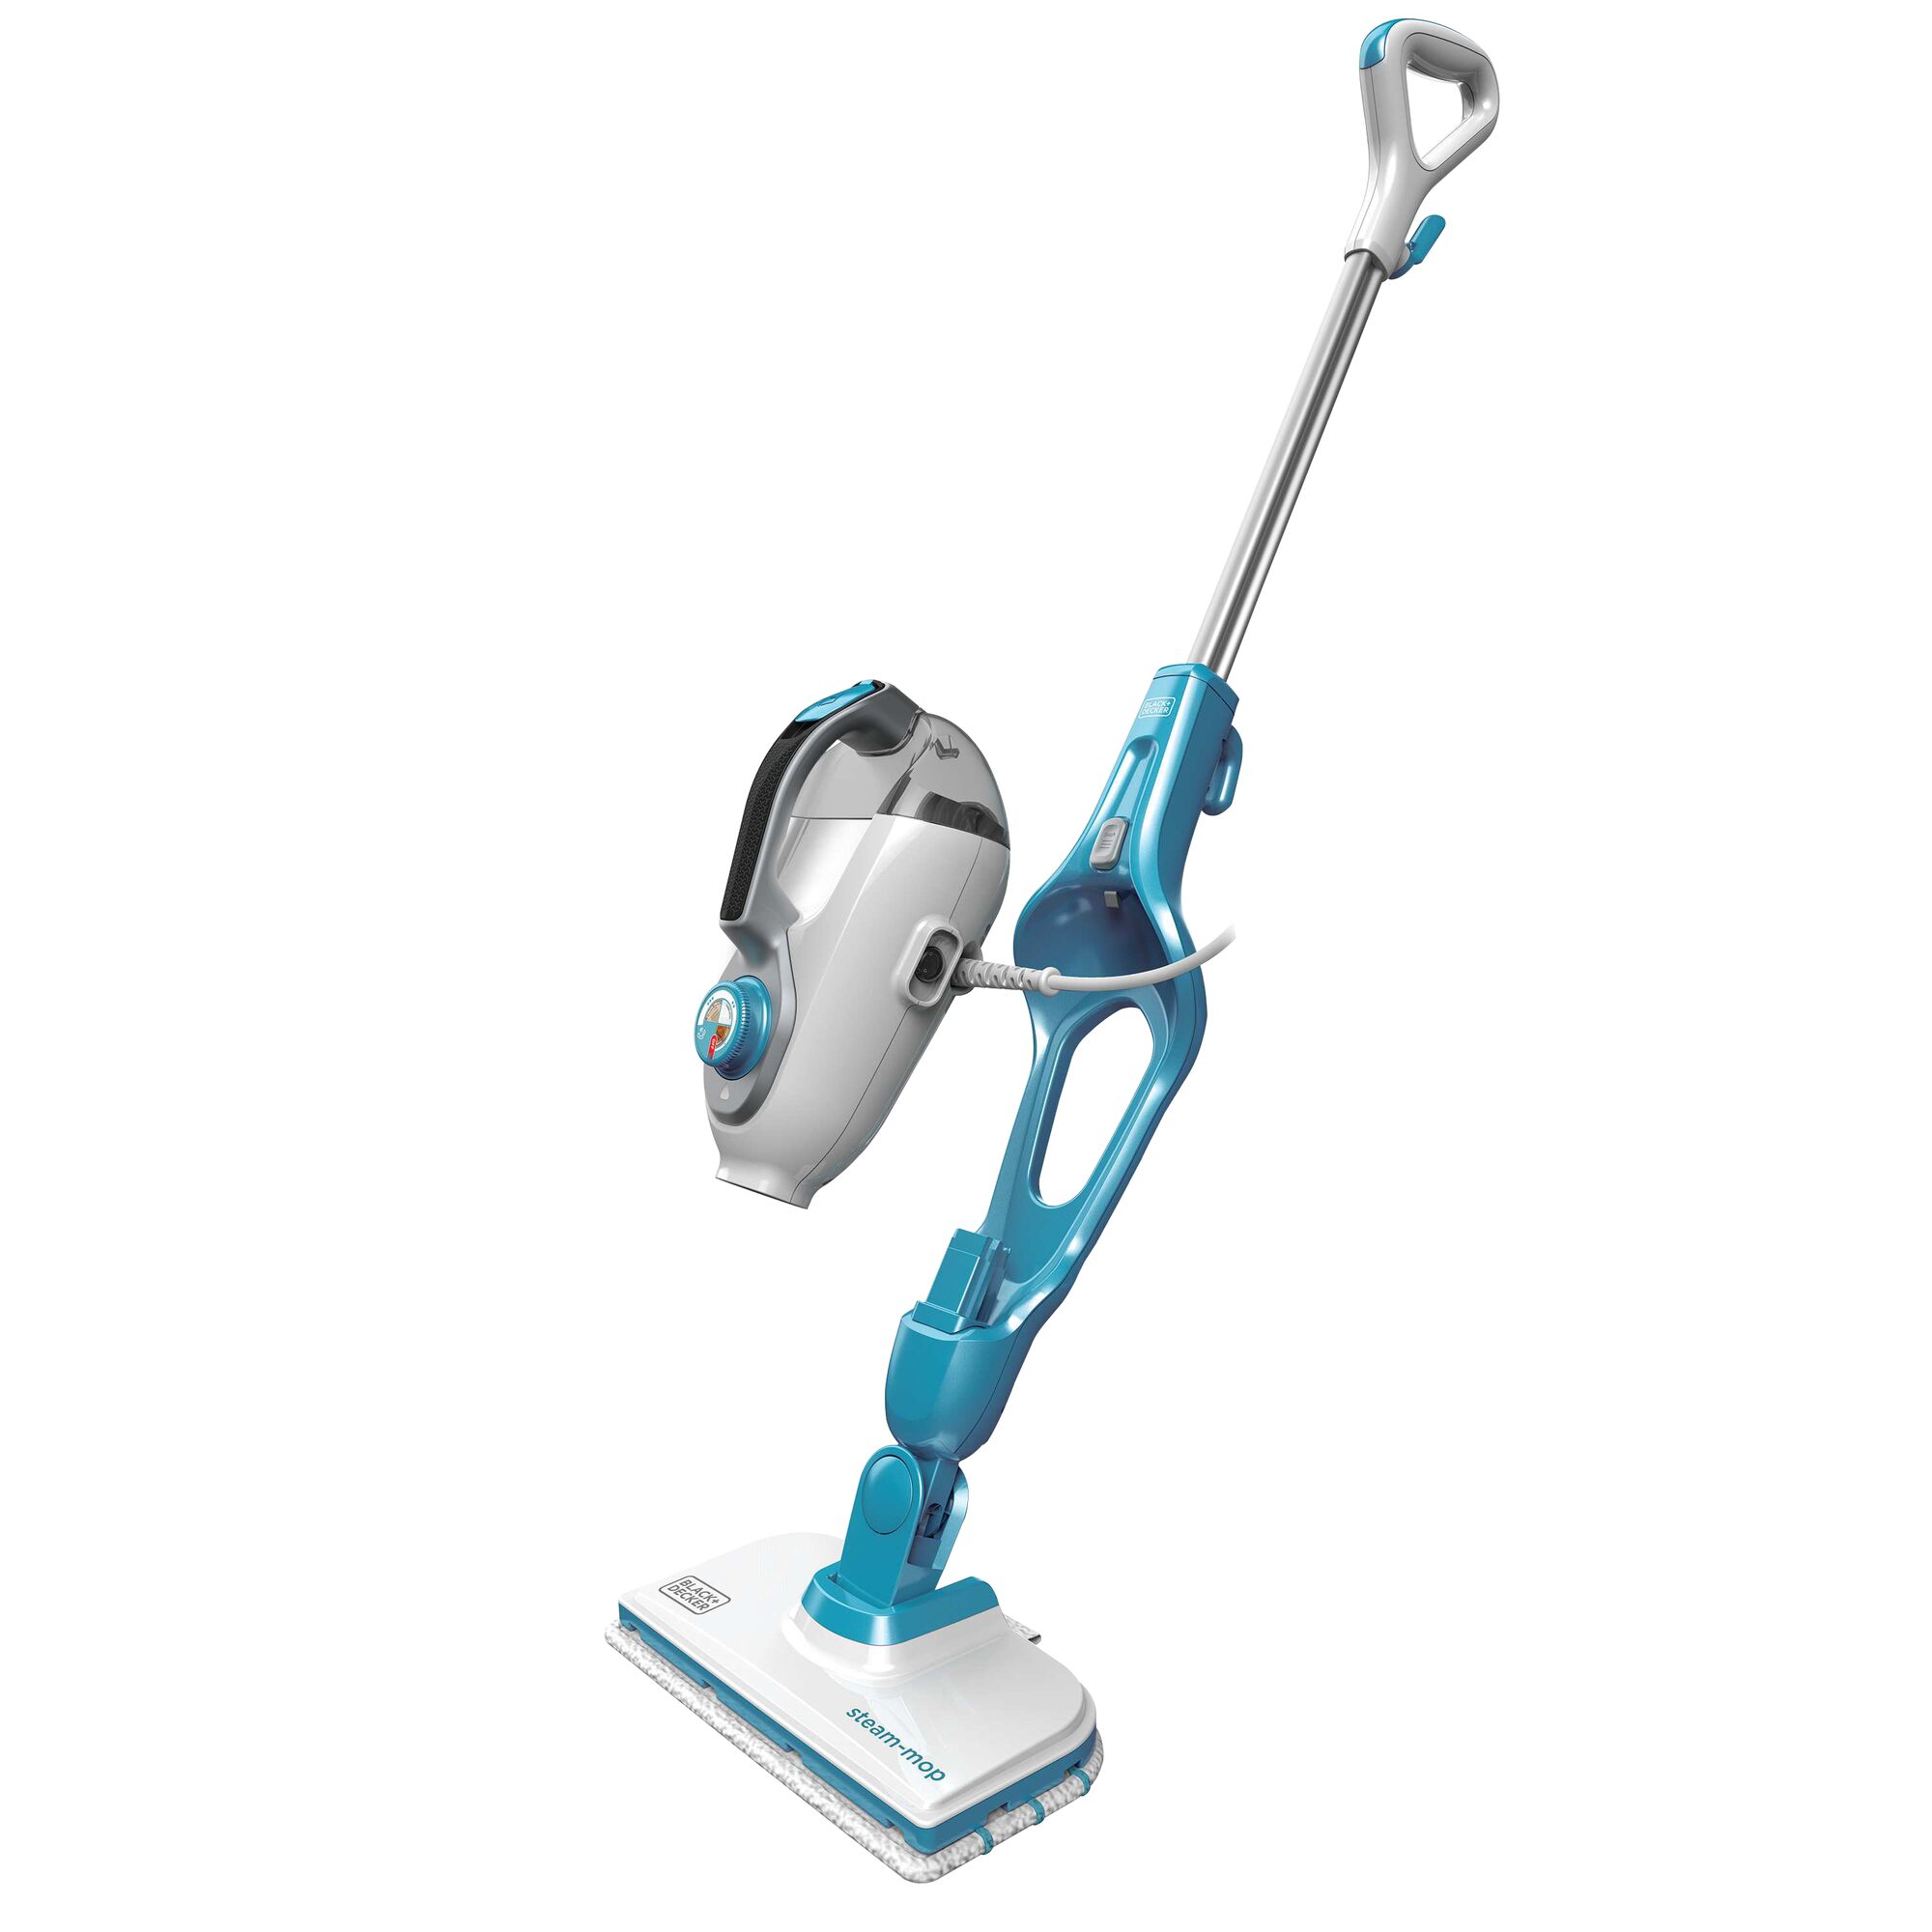 Side profile of 7 in 1 Steam Mop with steamglove handheld steamer.